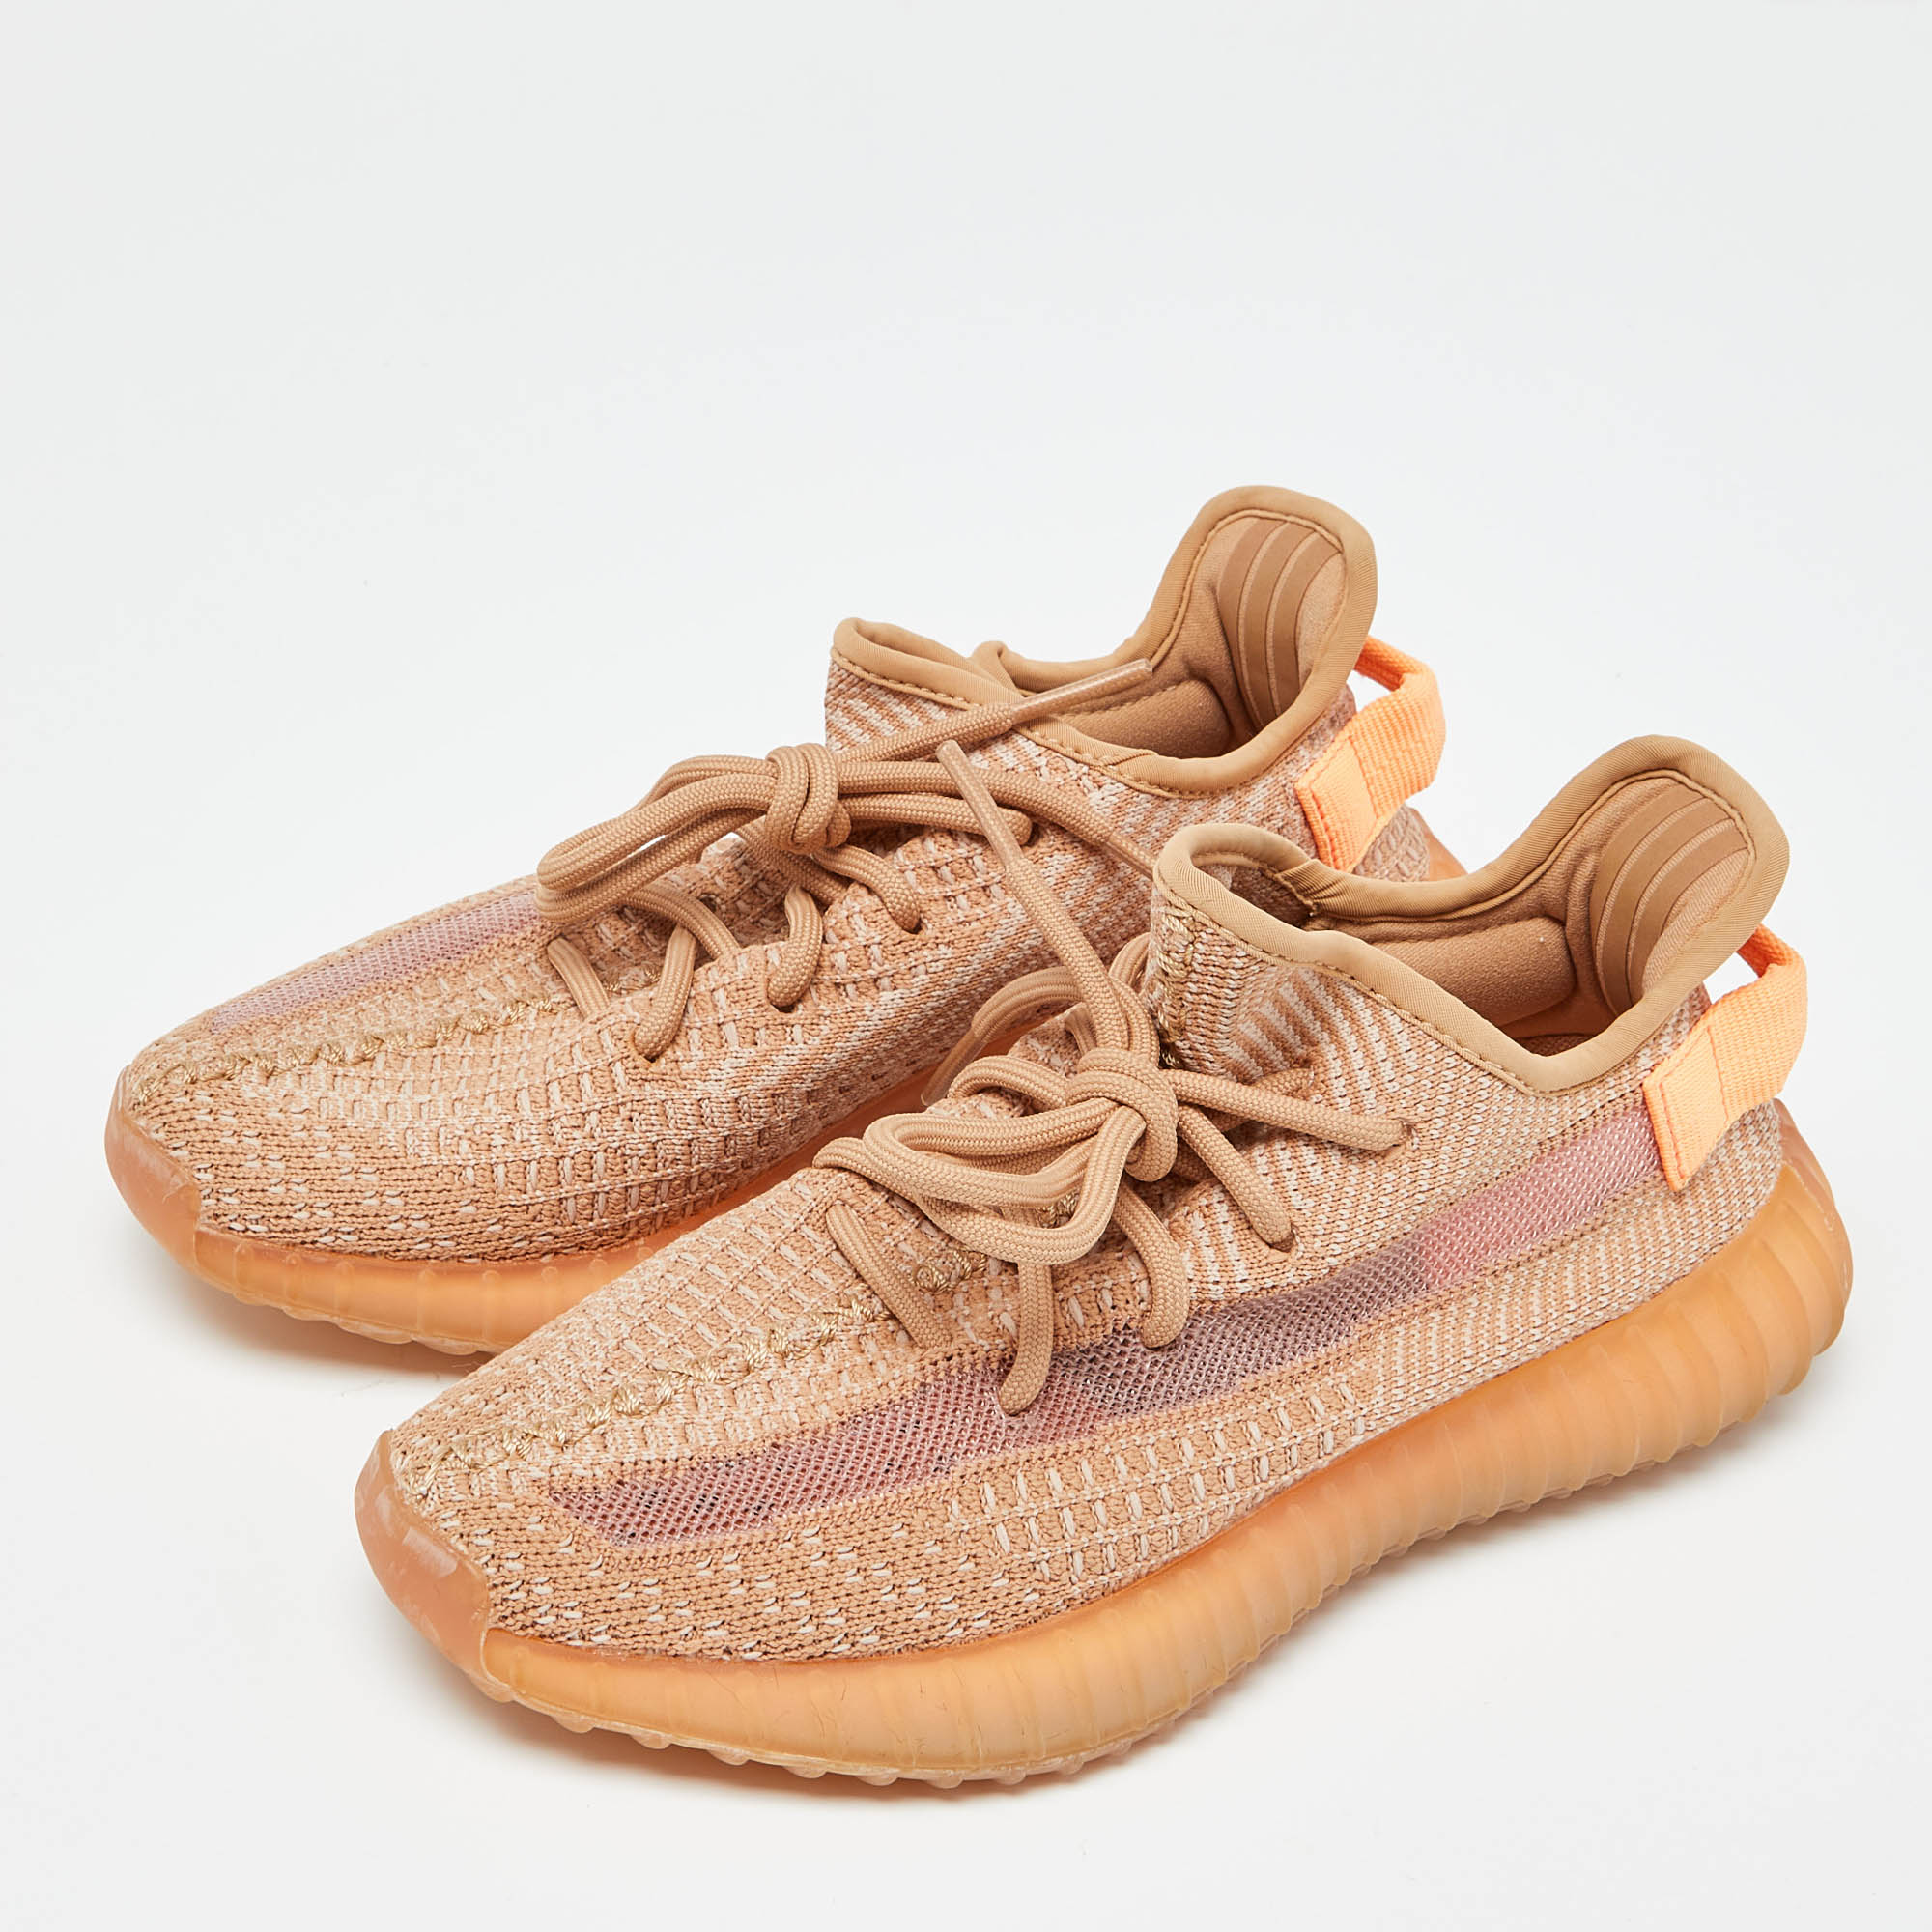 

Yeezy x Adidas Orange Knit Fabric Boost 350 V2 Clay Sneakers Size 36 2/3